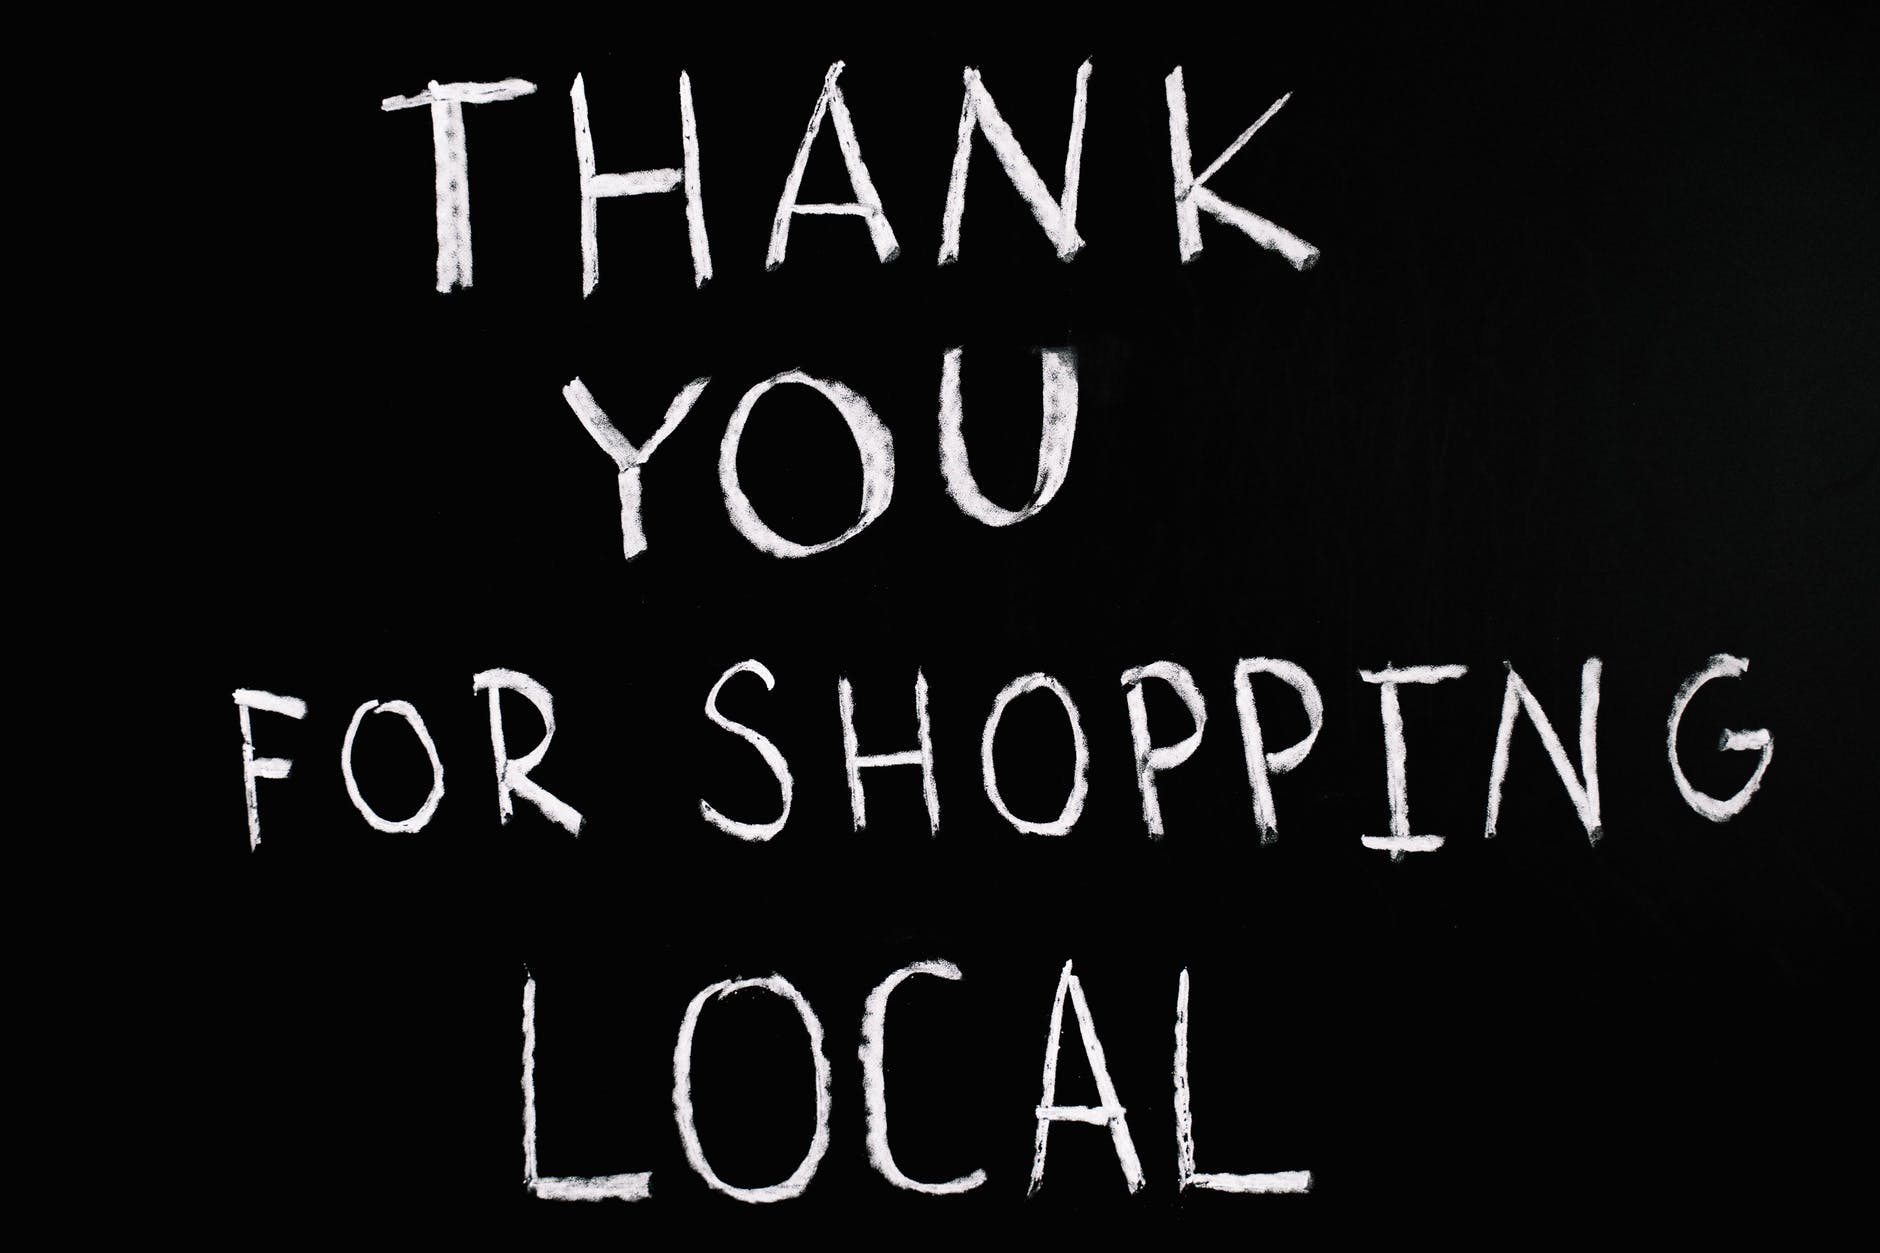 thank you for shopping local lettering text on black background